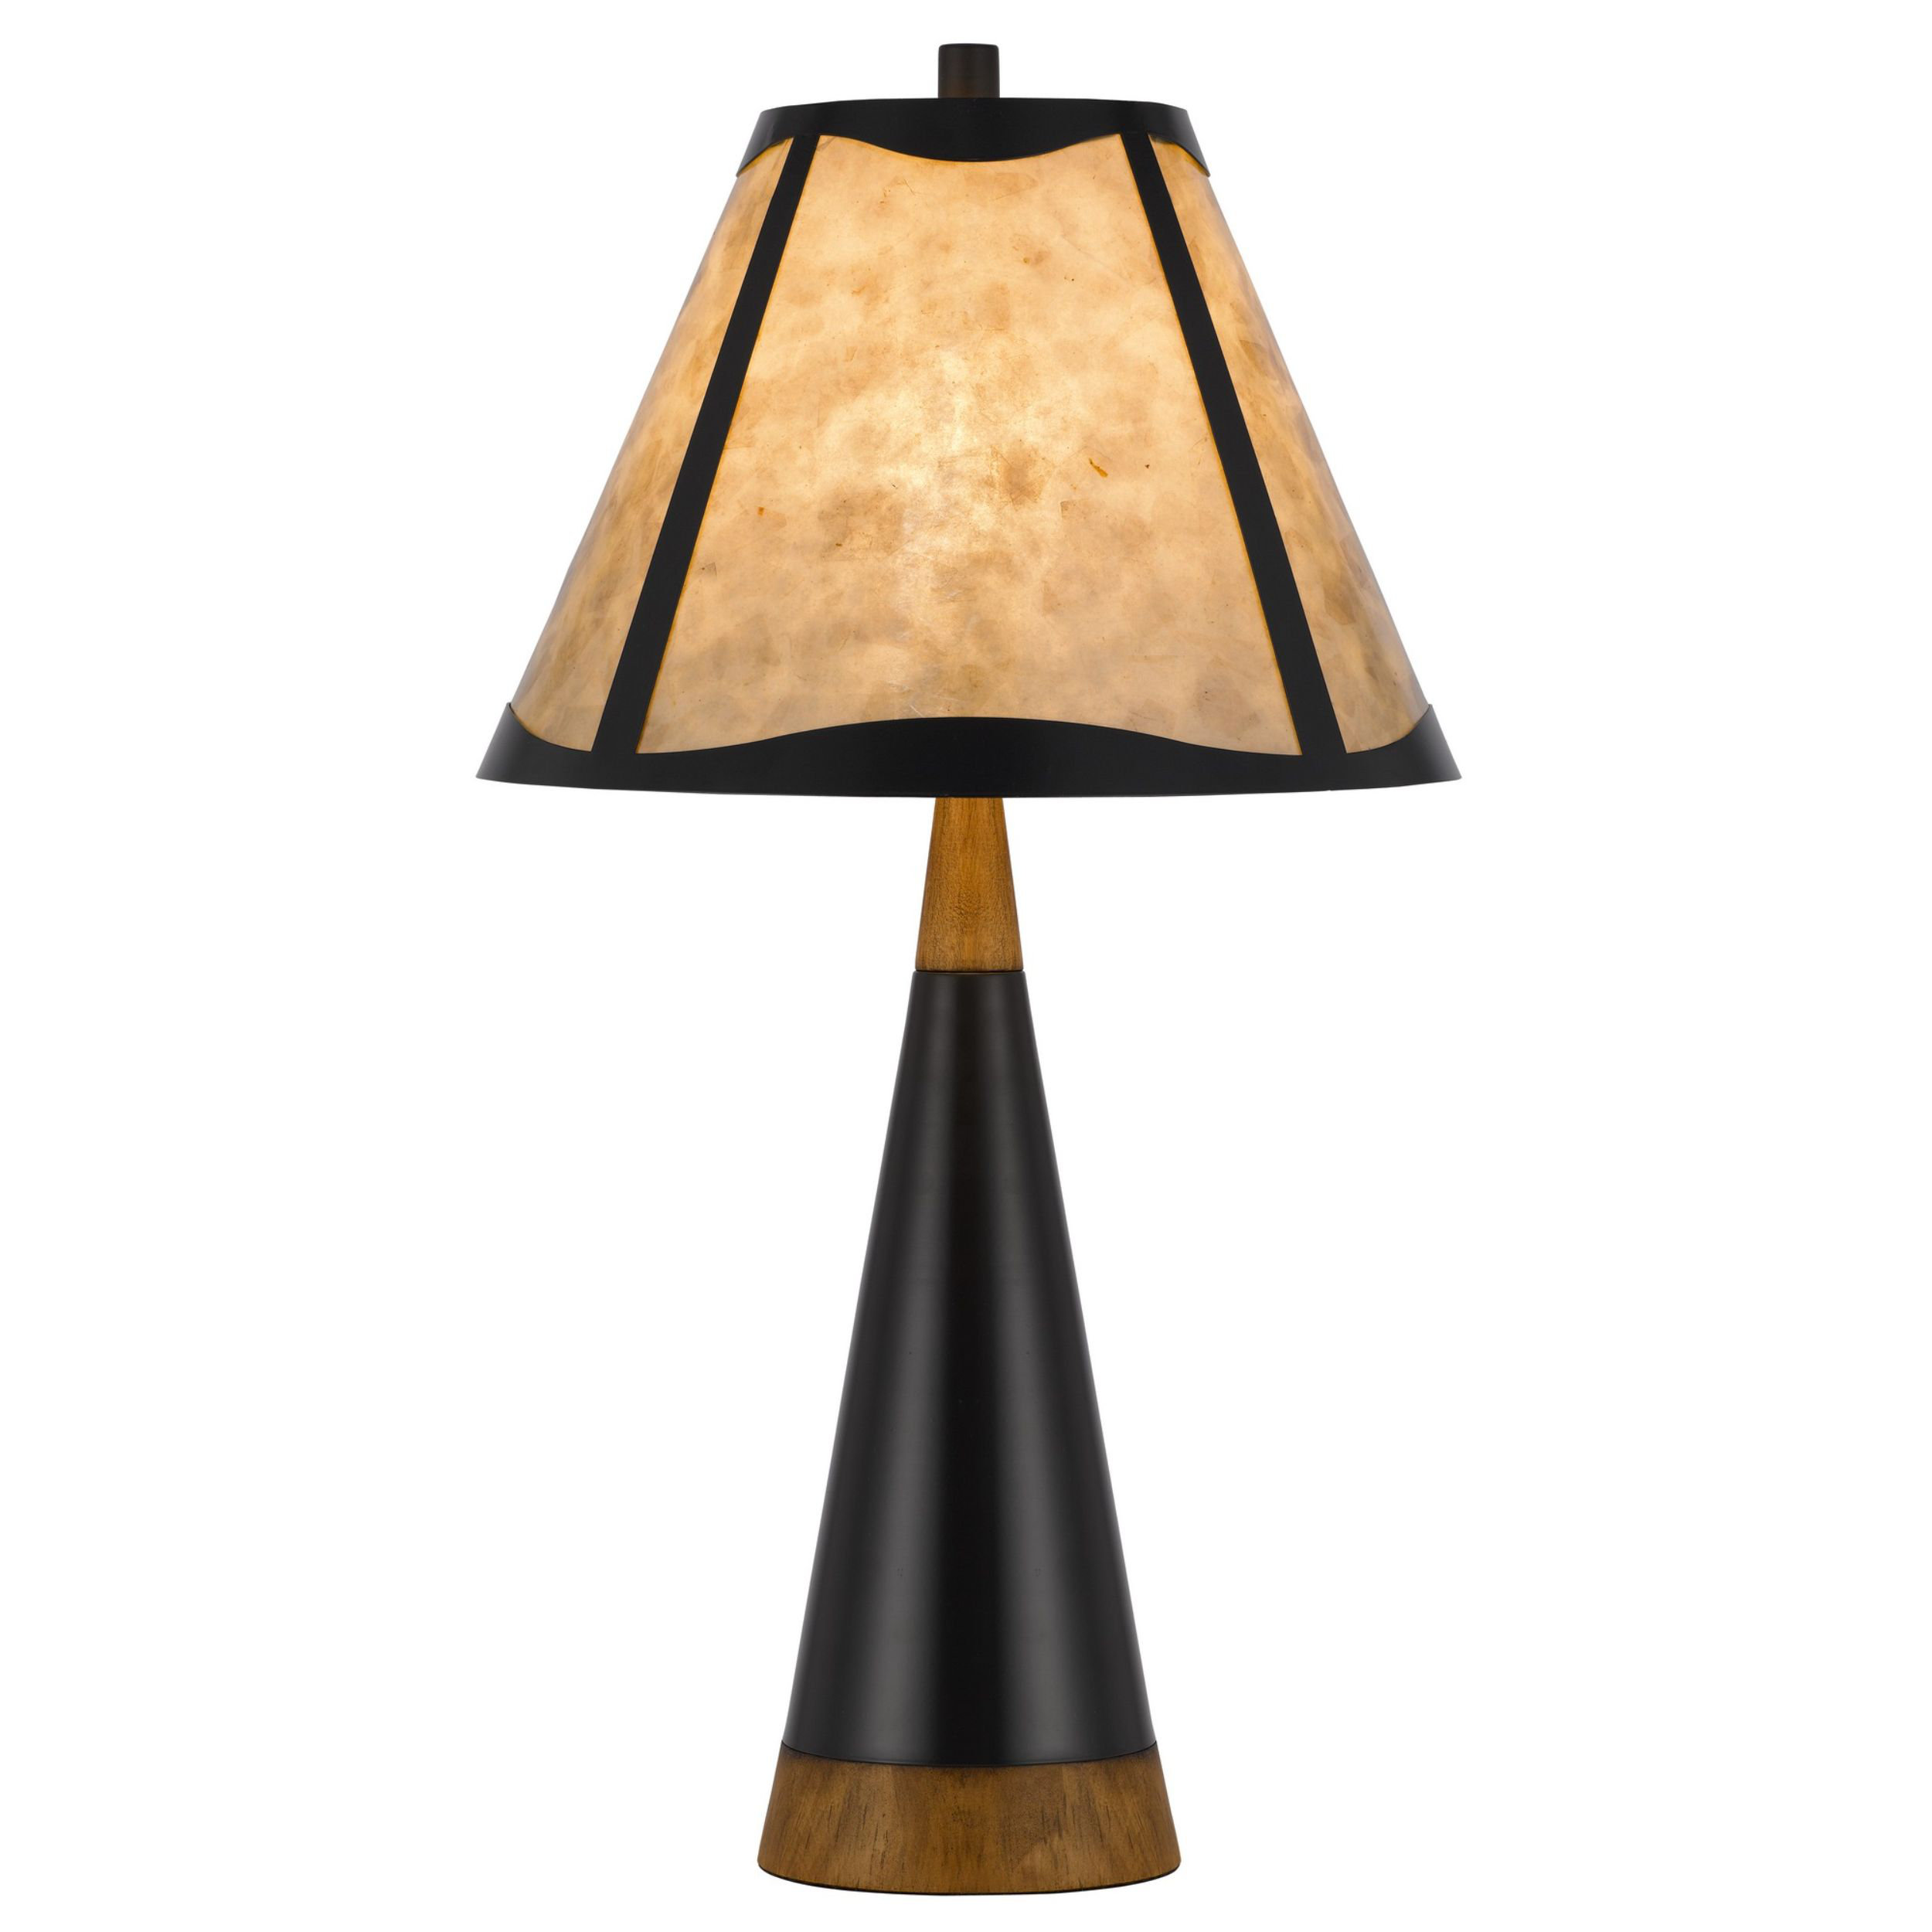 30 Inch 3 Way Table Lamp, Beige Mica Shade, Rubberwood And Black Metal Body